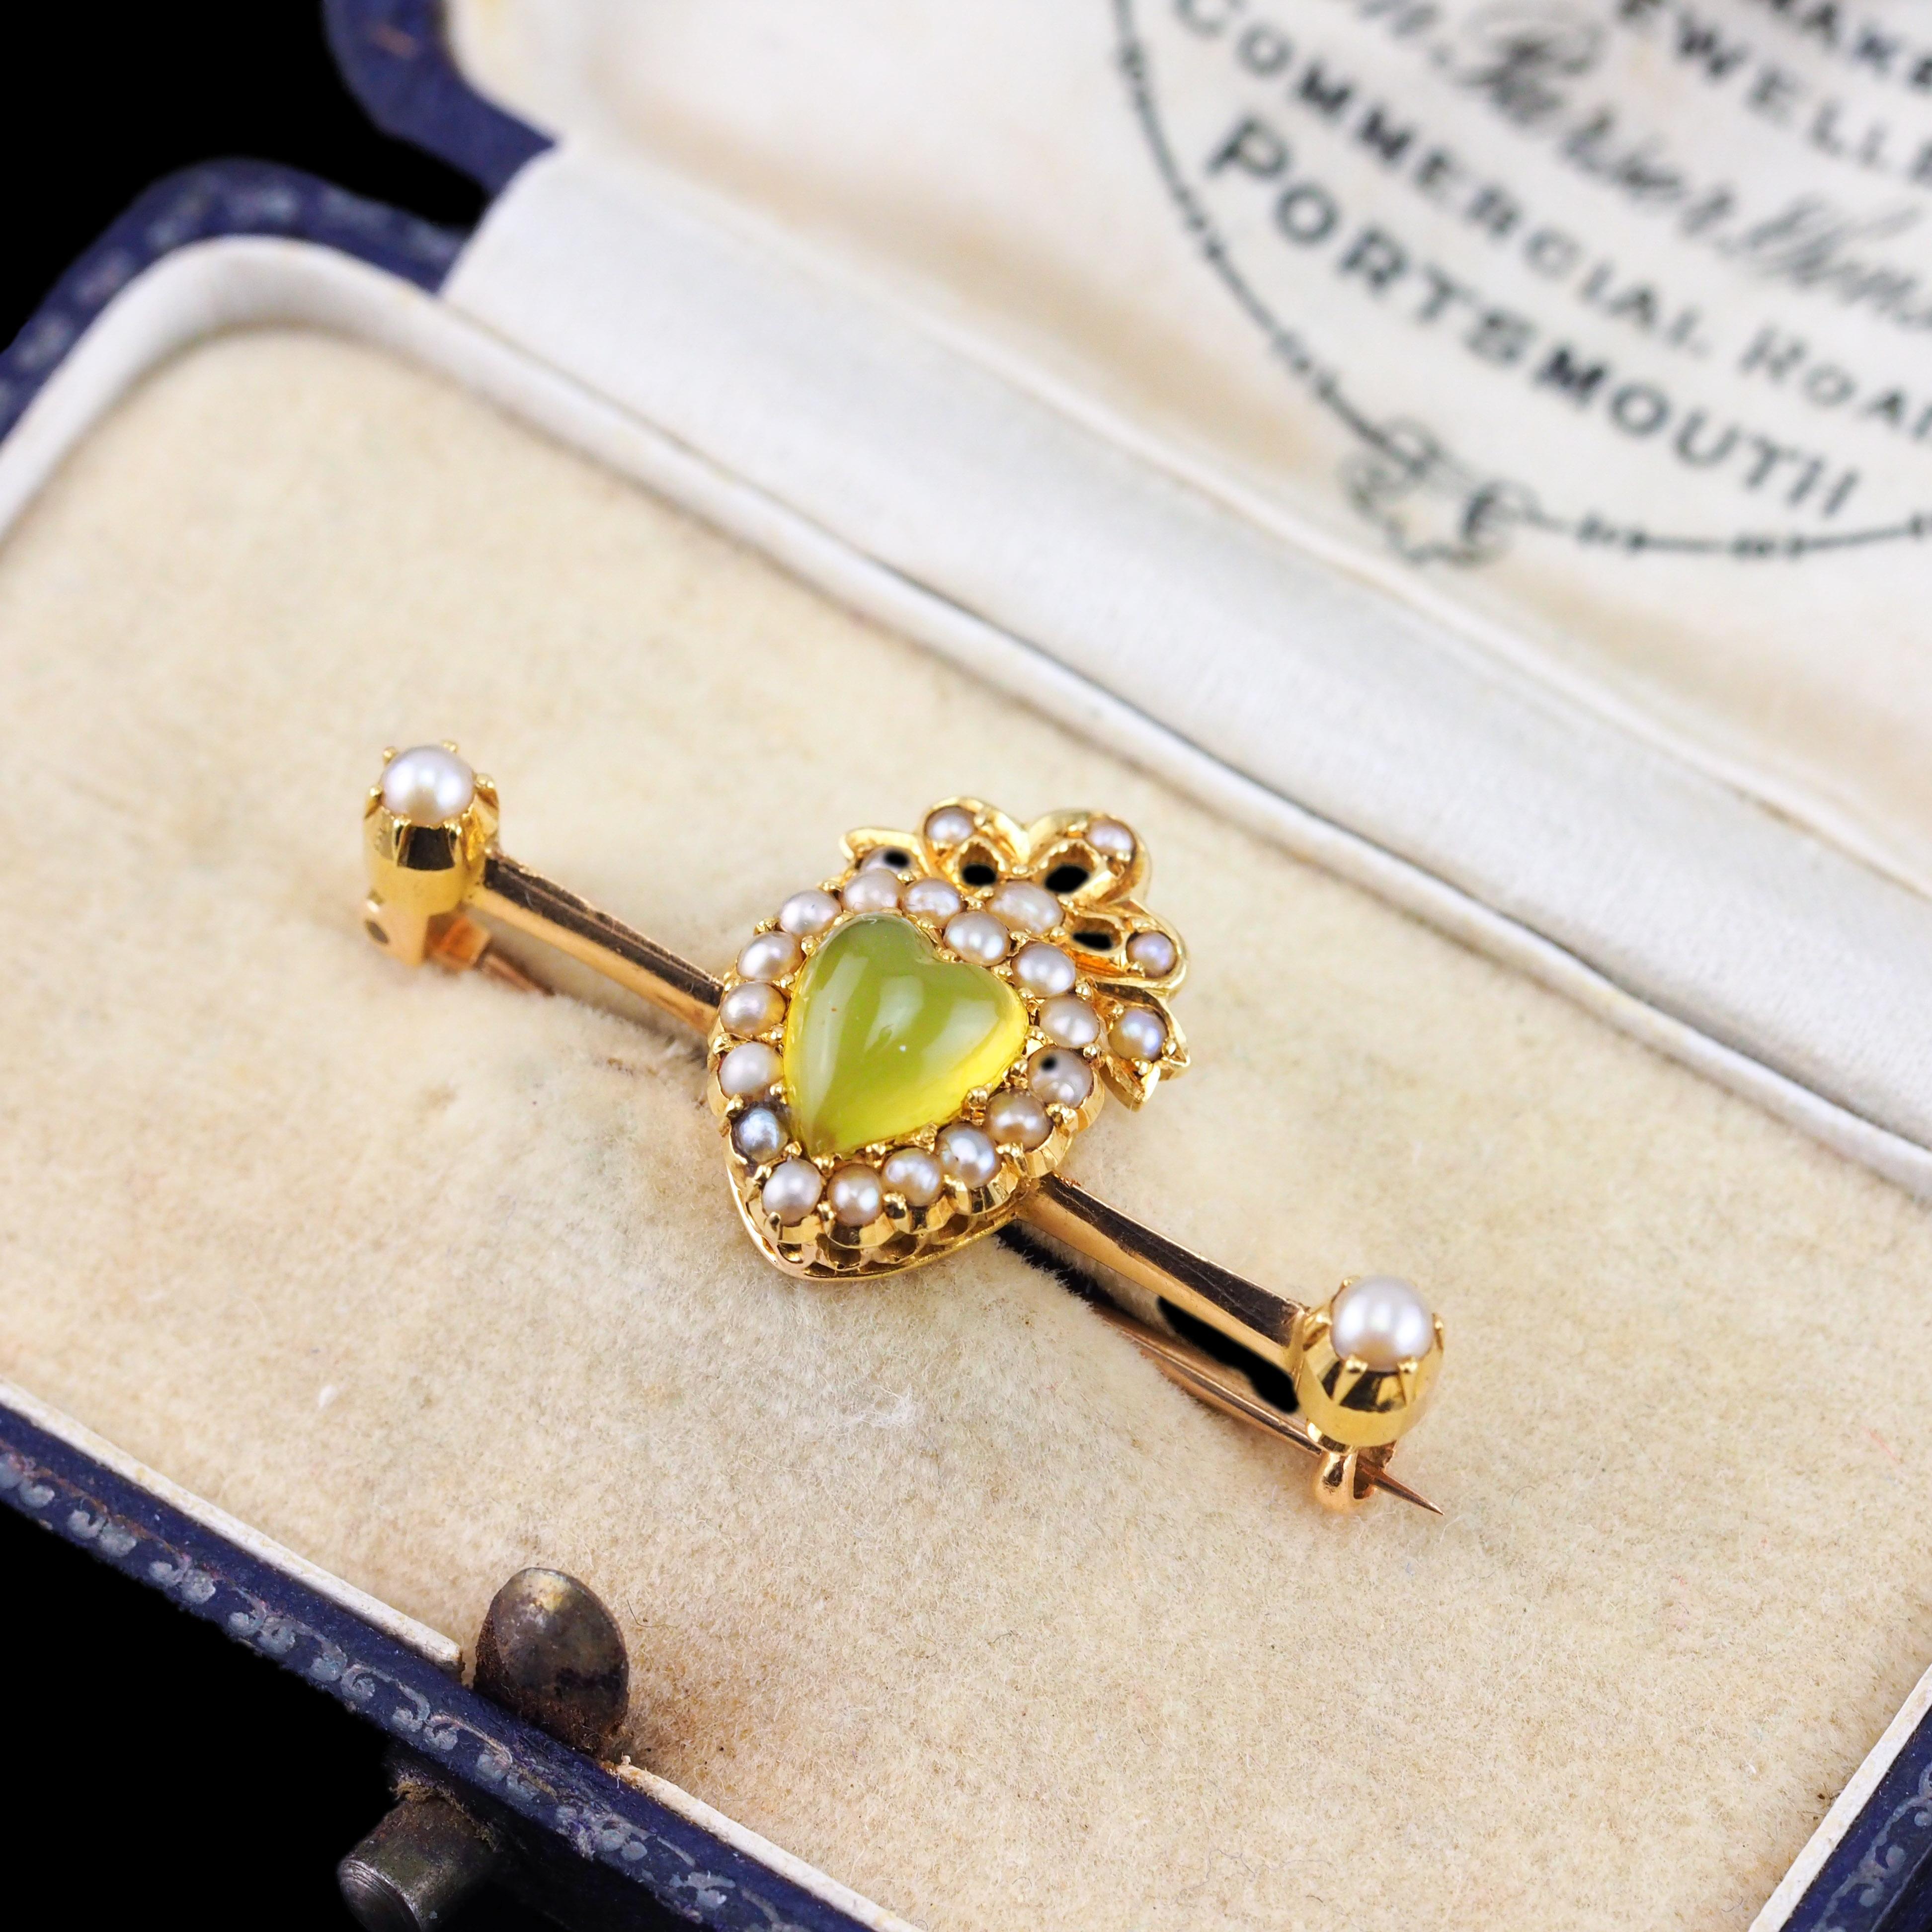 We are delighted to offer this sensational antique Victorian 15ct gold Chalcedony Brooch made c.1890.

Fitted in its original antique case/box (included in the price), upon opening a most endearing and eye-catching green Chalcedony heart cabochon